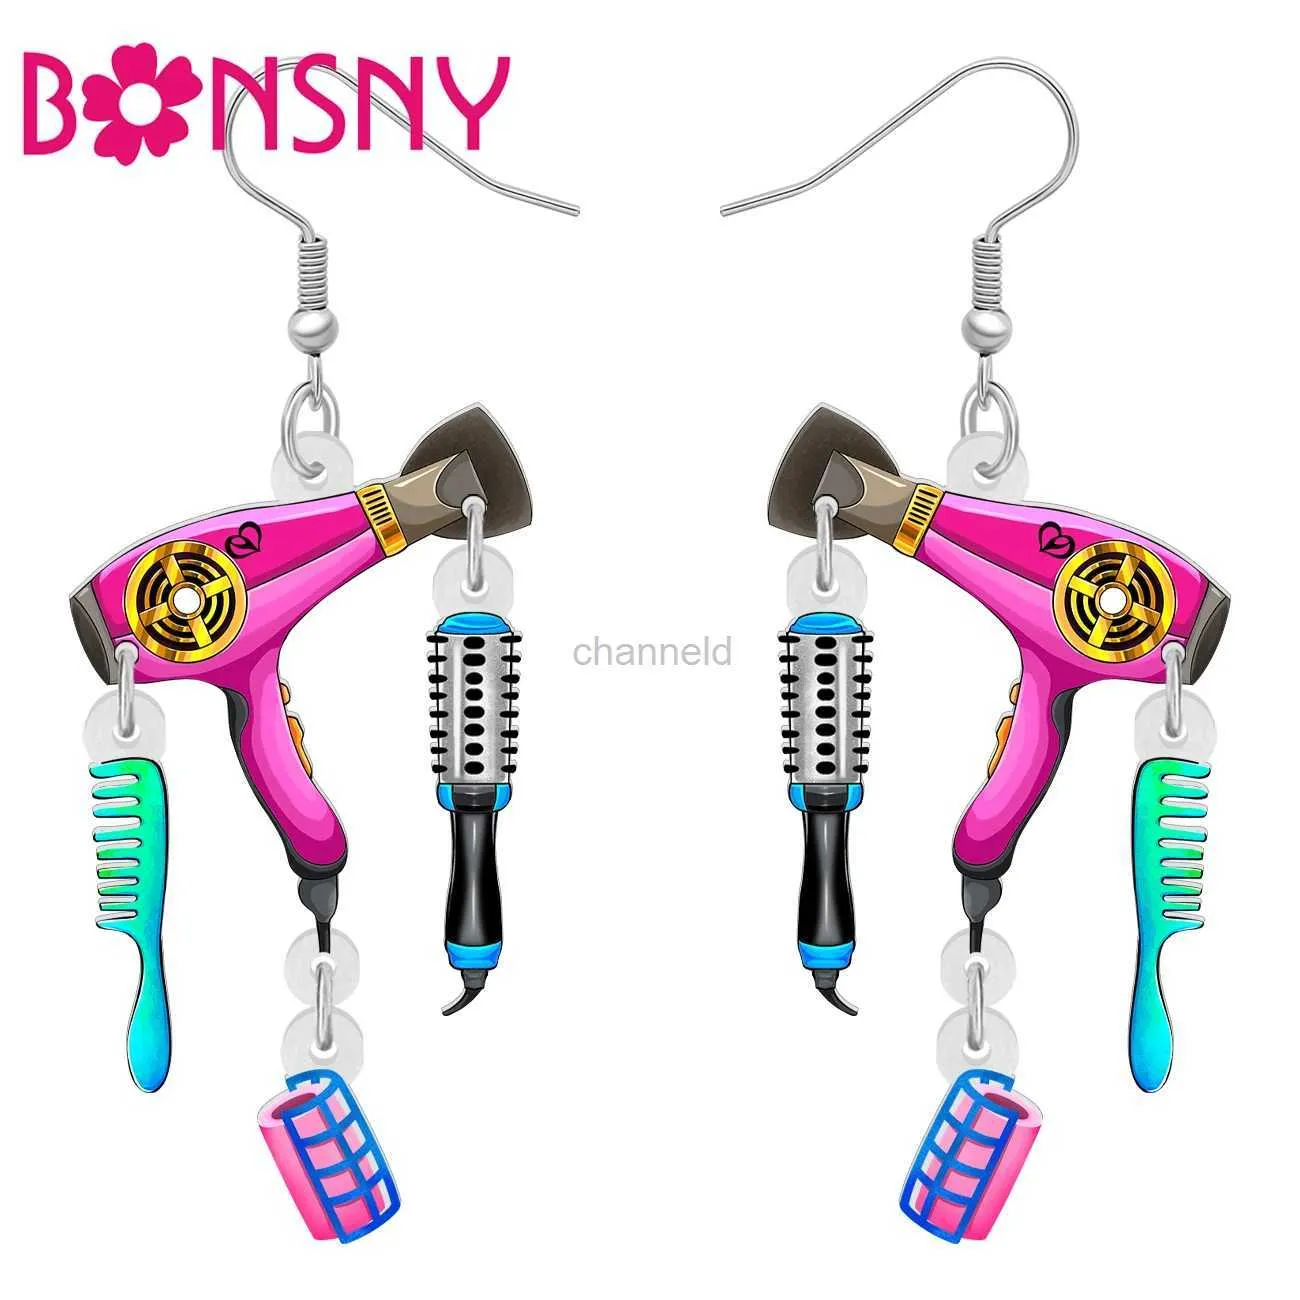 Other BONSNY Acrylic Novelty Hairdryer Comb Sets Drop Dangle Jewelry Earrings Party Favors For Women Girls Kids Gifts 240419